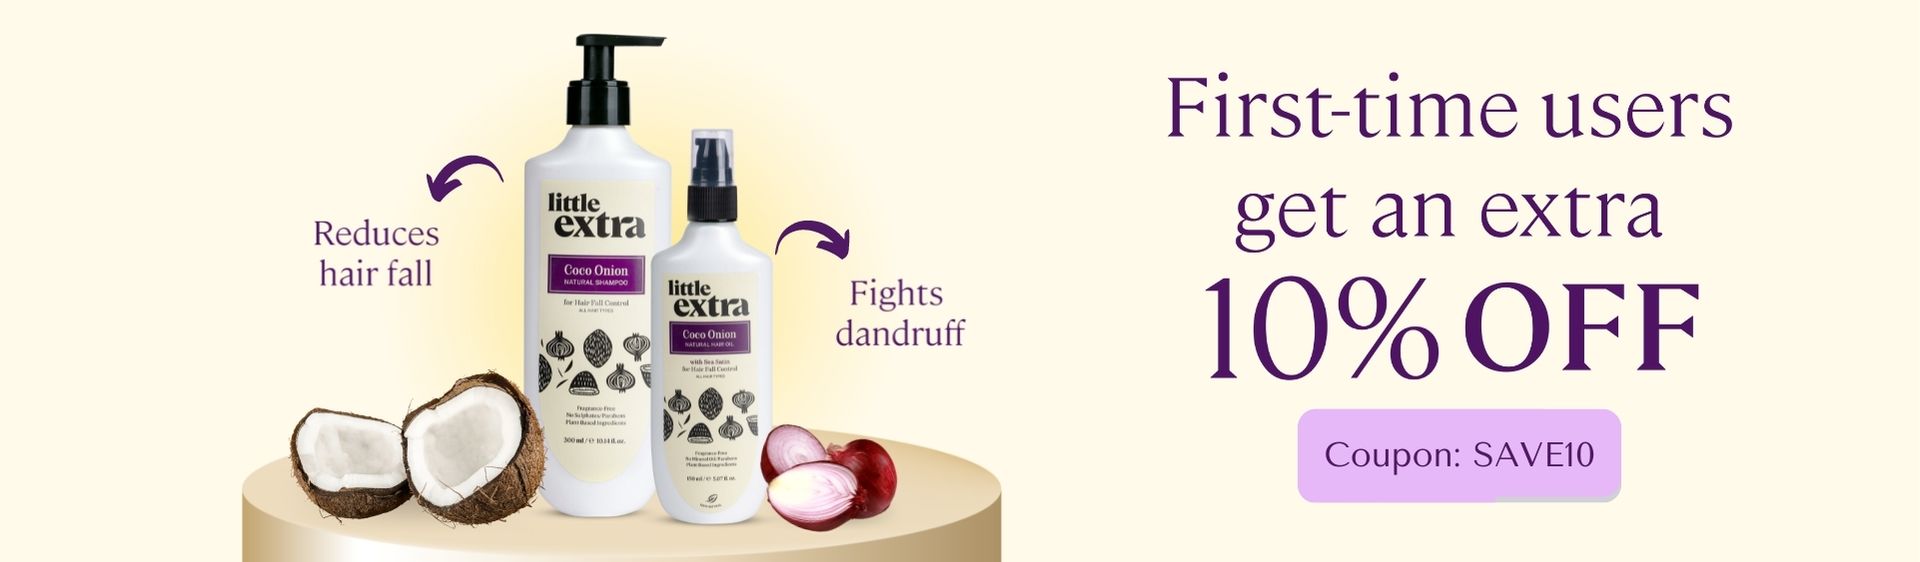 discount for shampoo and hair oil in india